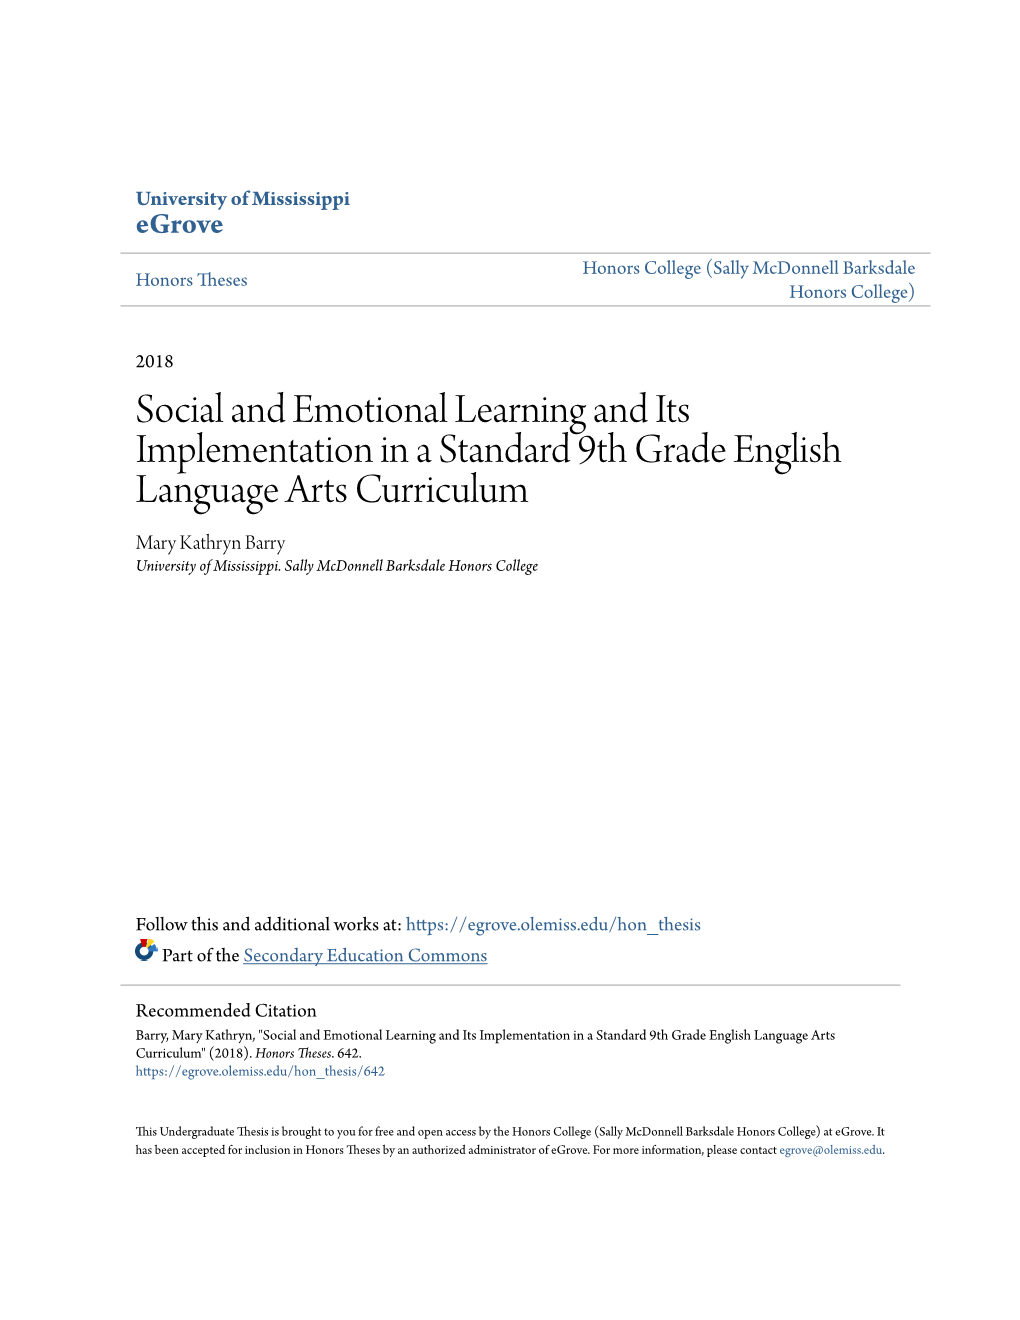 Social and Emotional Learning and Its Implementation in a Standard 9Th Grade English Language Arts Curriculum Mary Kathryn Barry University of Mississippi